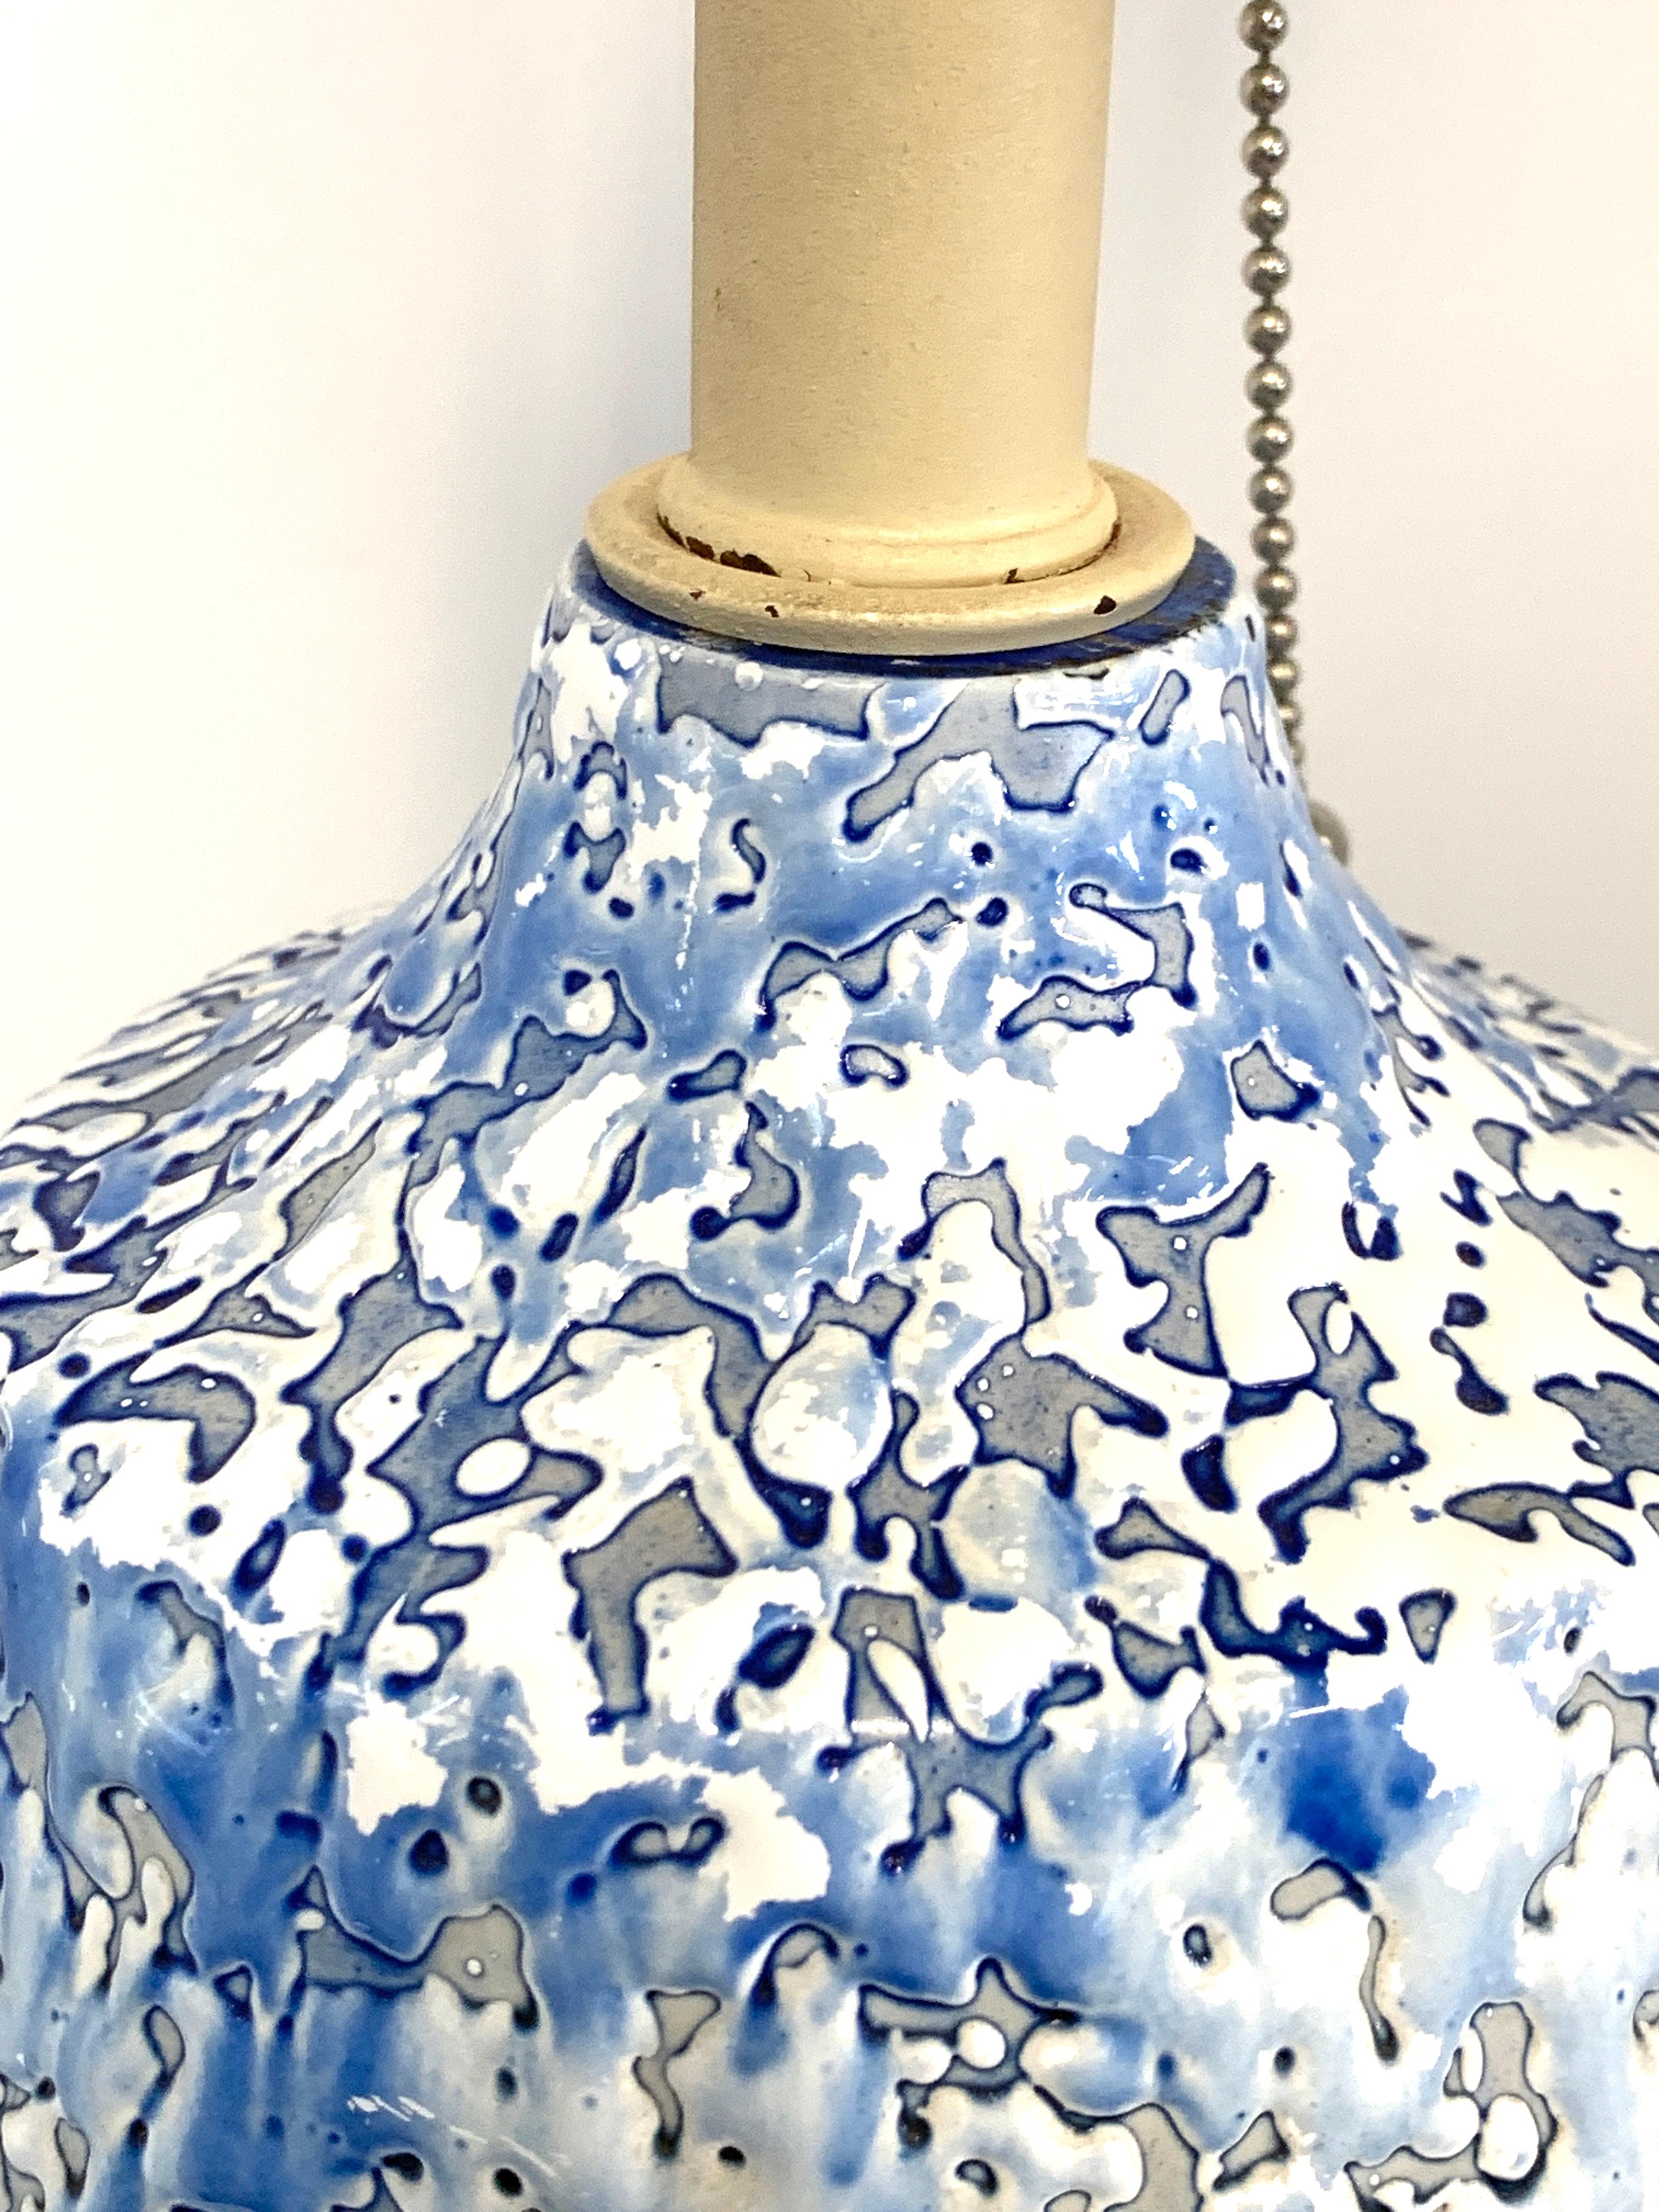 Hand-Crafted Midcentury Drip Glaze Ceramic Lamp For Sale